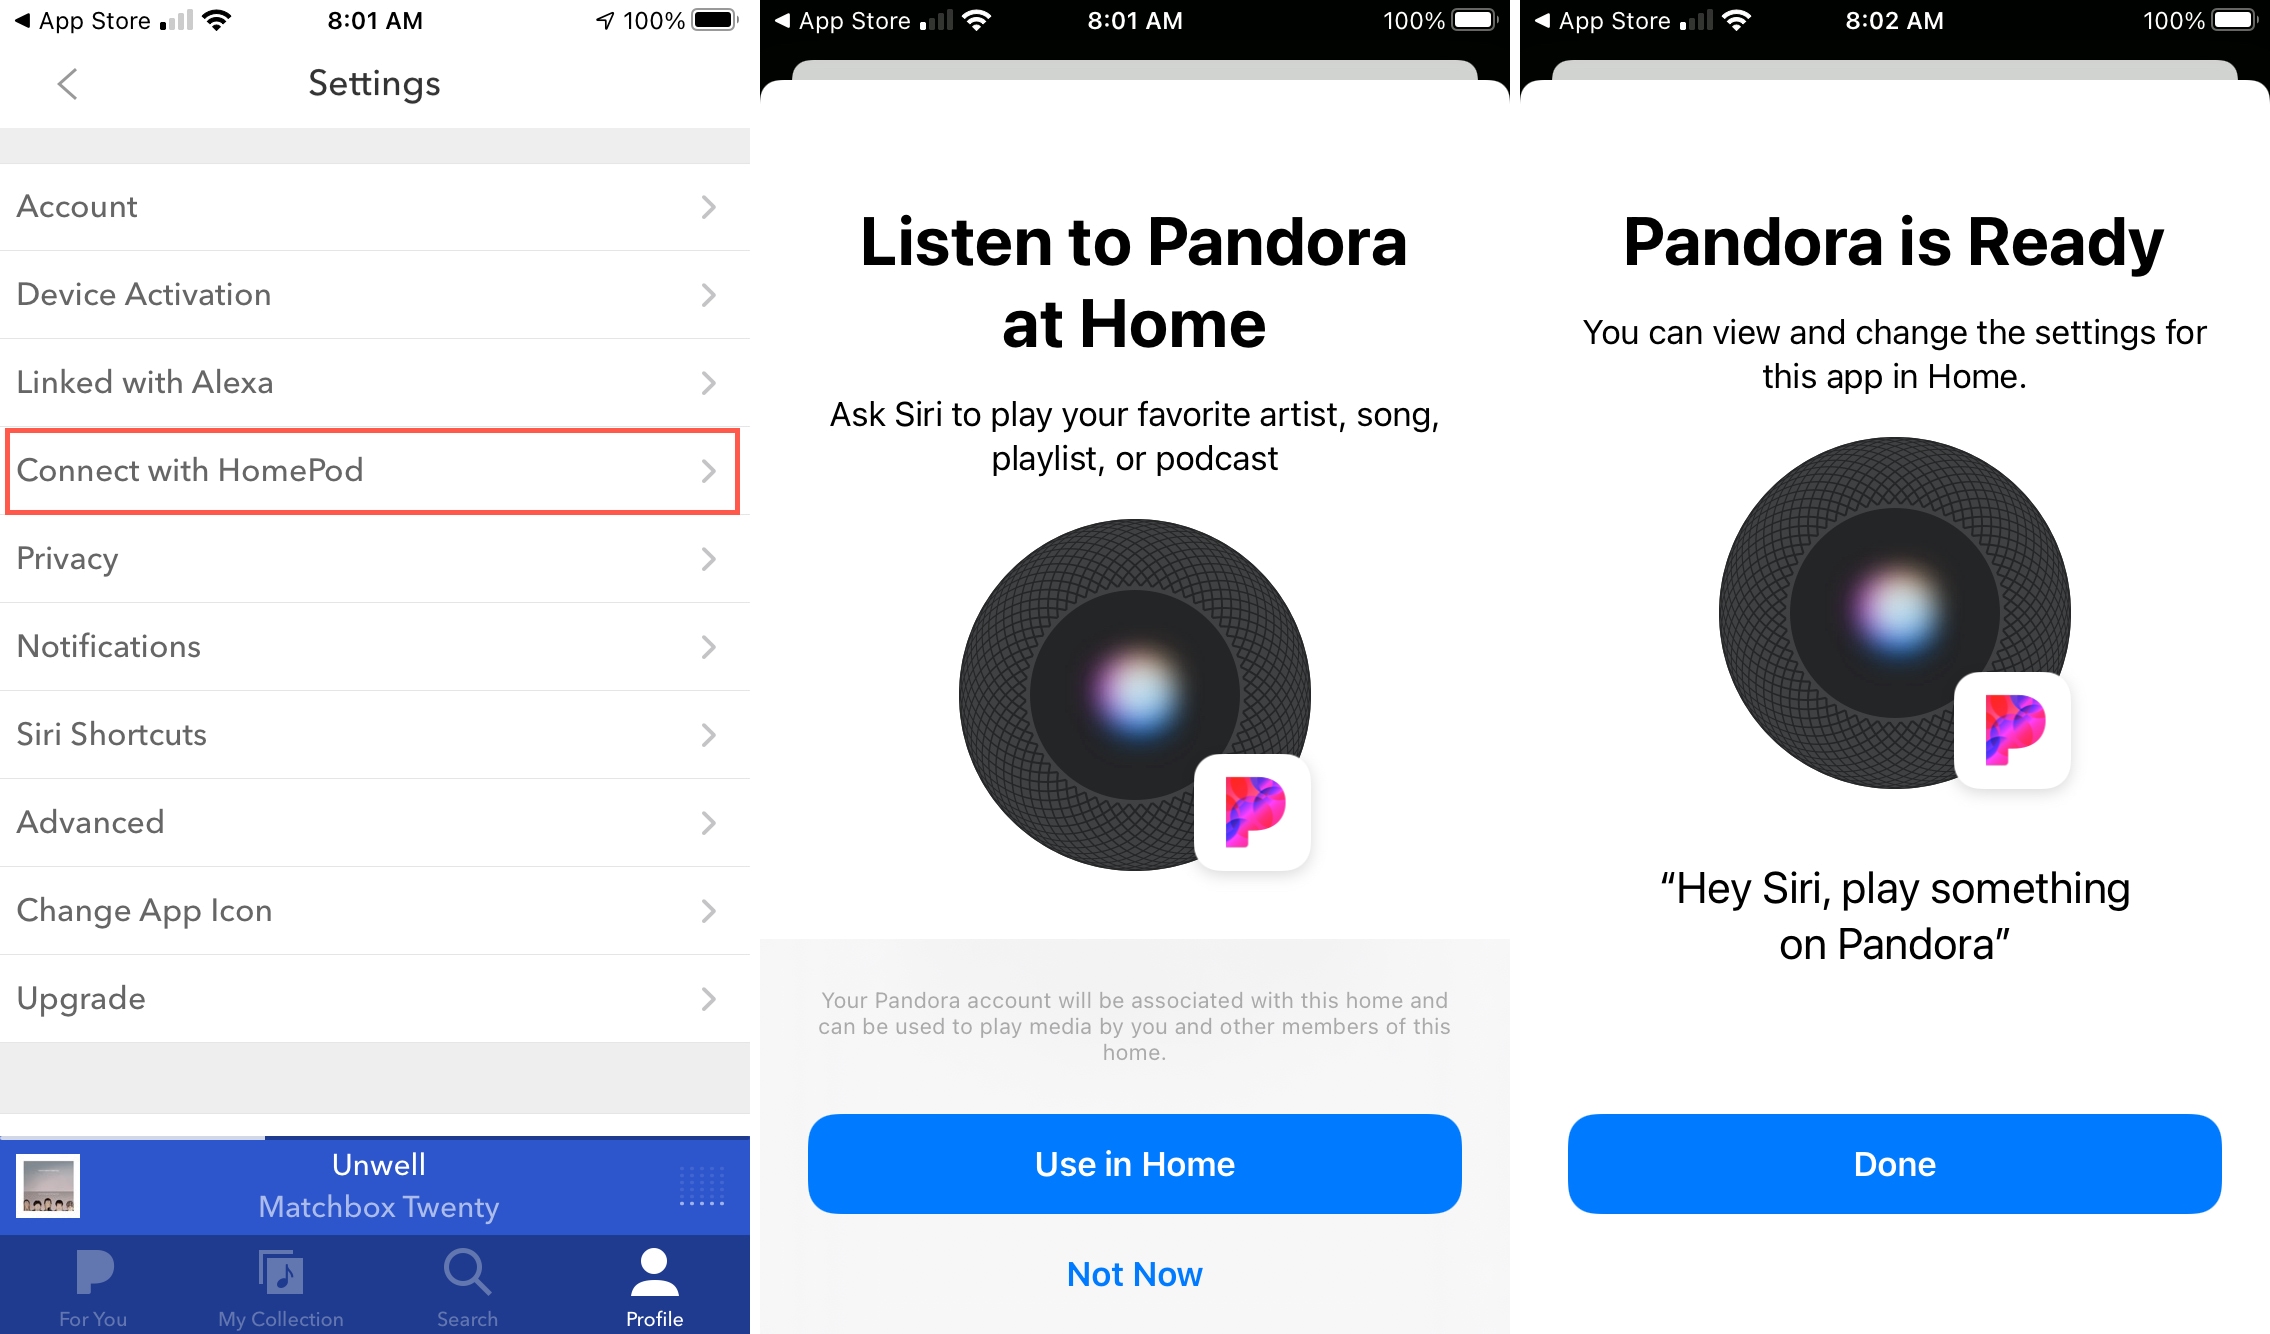 Pandora app Connect with HomePod